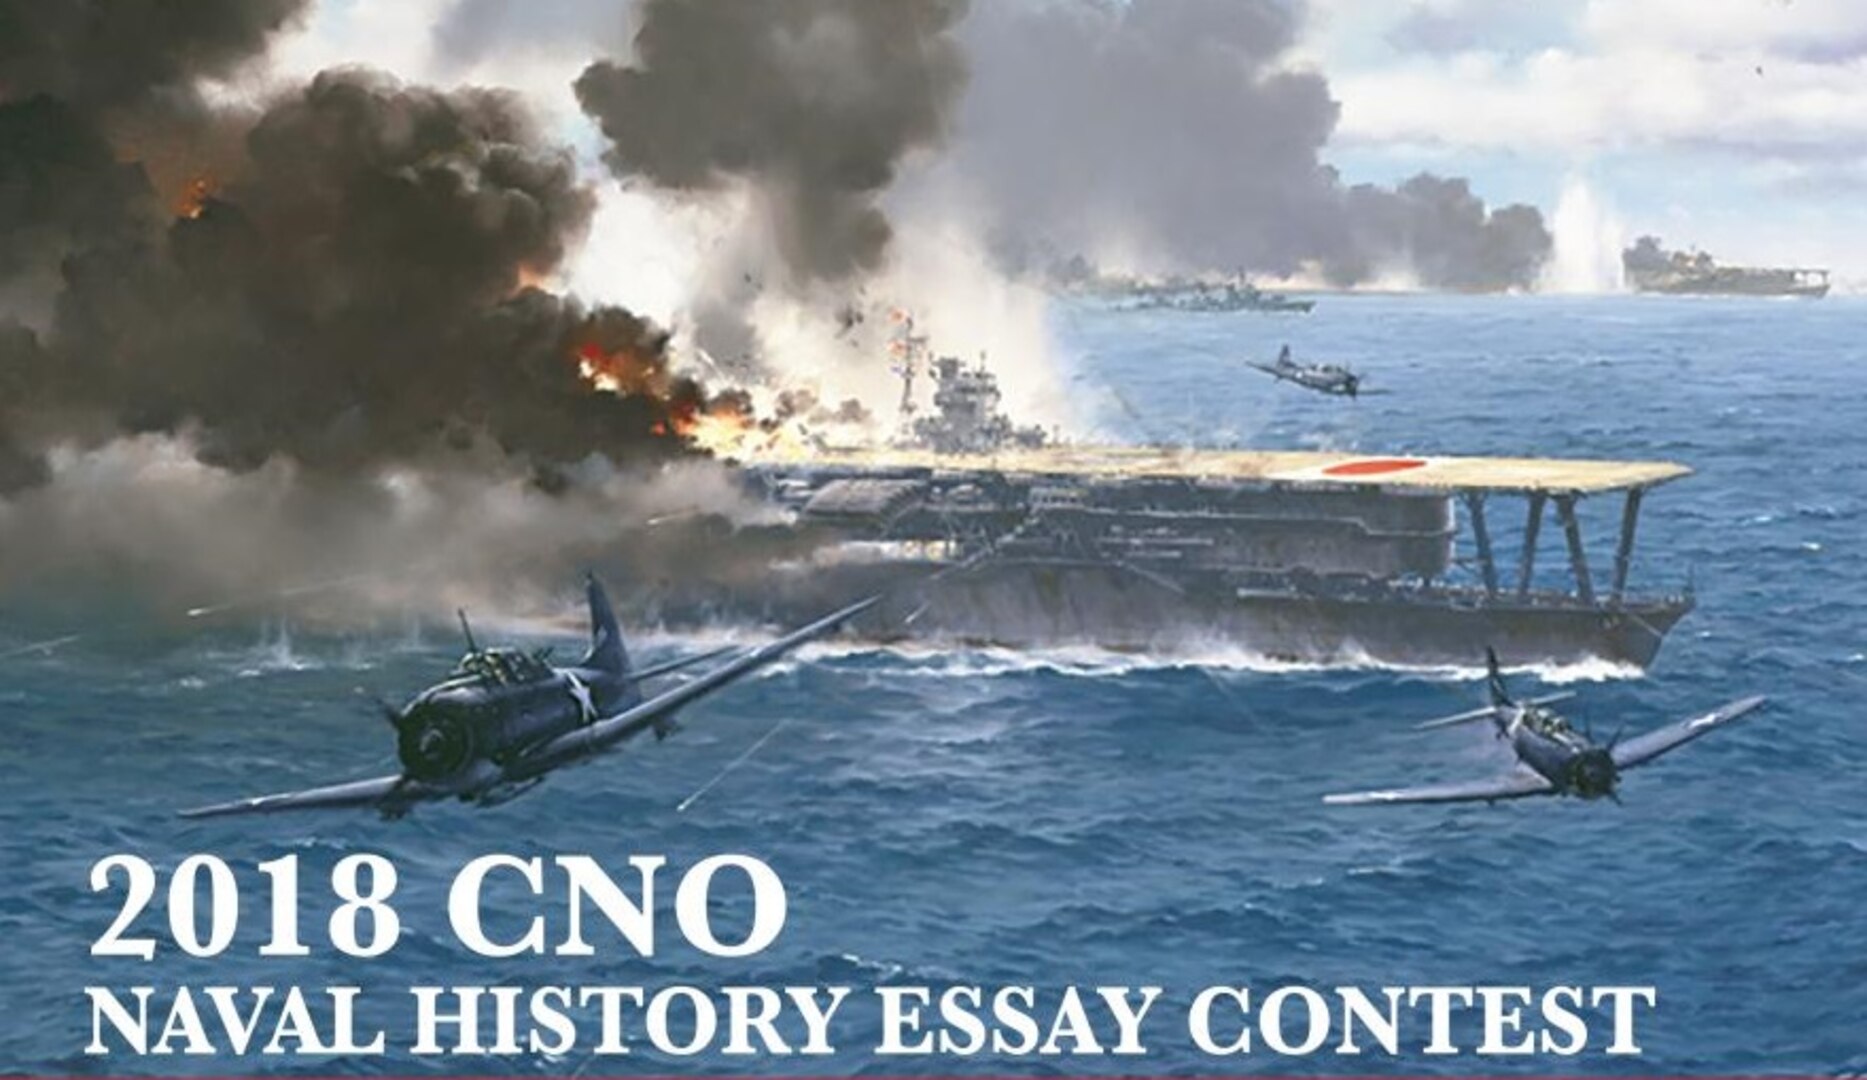 The Chief of Naval Operations (CNO) has announced the requirements for the 2018 Naval History Essay Contest with a submission deadline of June 30.